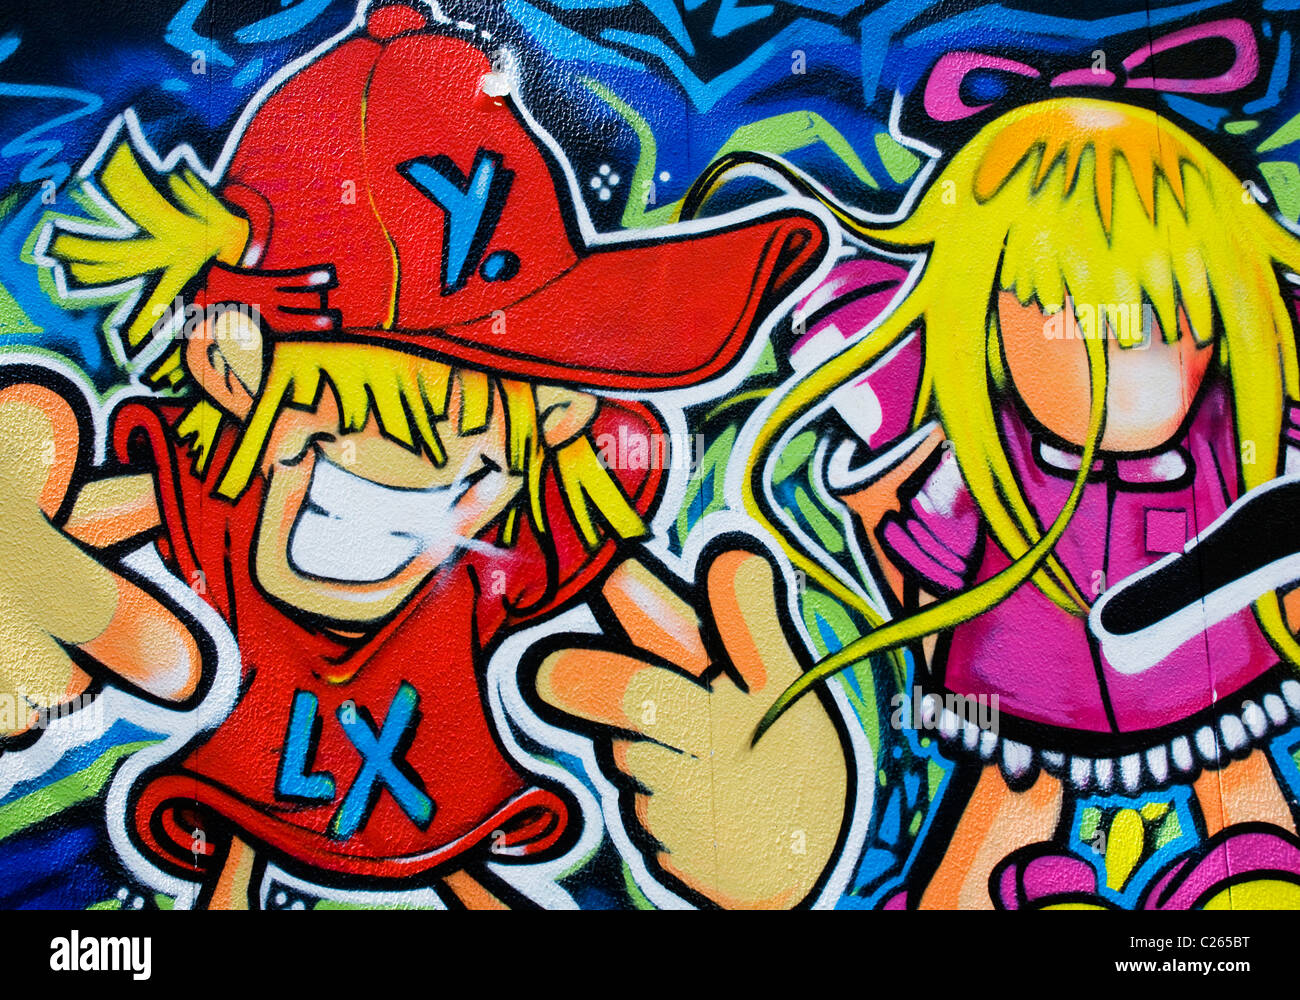 Detail of professional graffiti in Lisbon depicting cartoon male and female characters Stock Photo